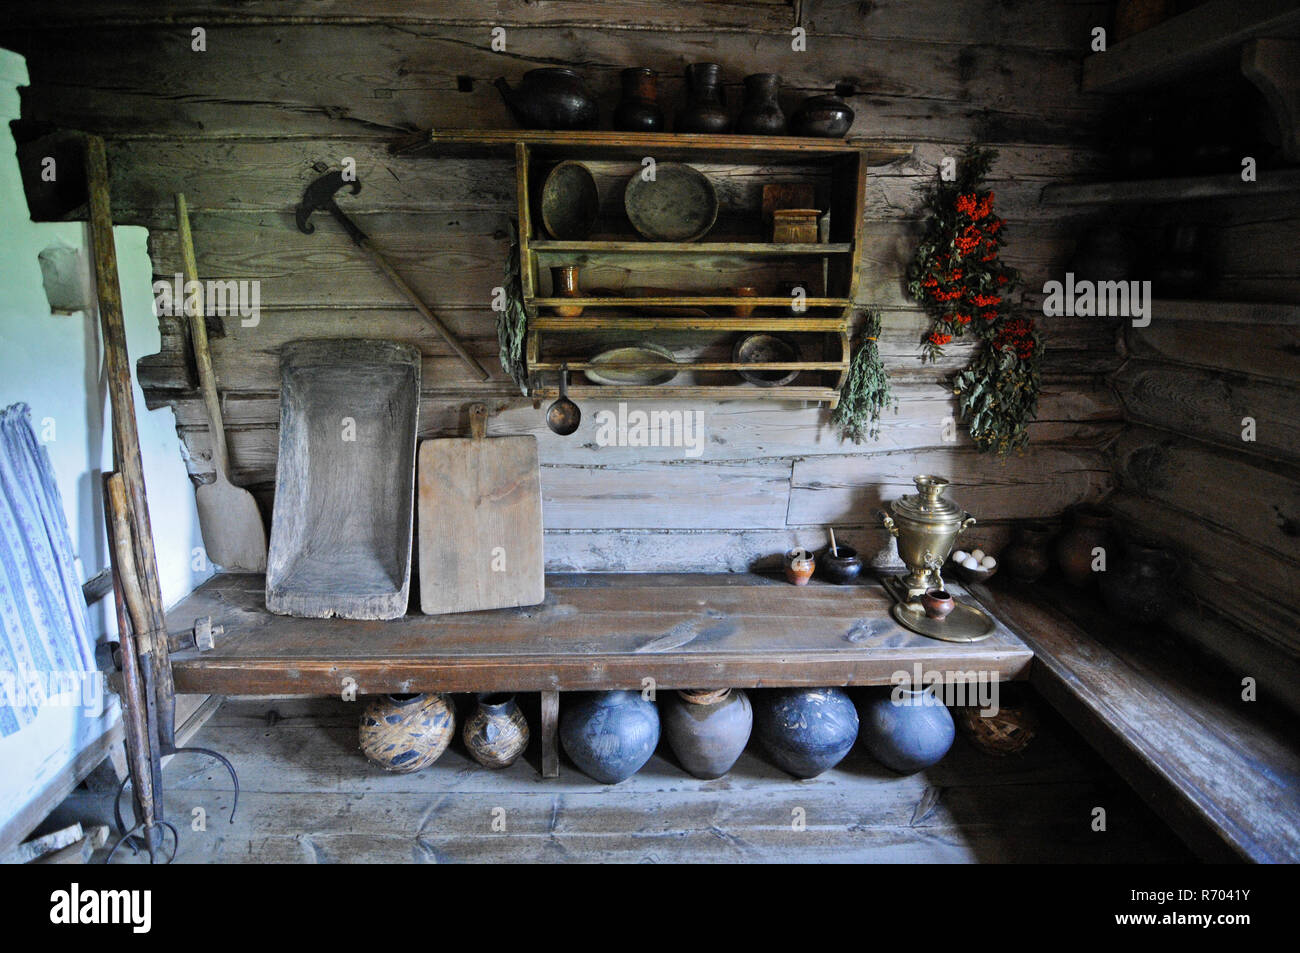 Museum of Wooden Architecture and Peasant Life -  Interior of an ancient Russian wooden house. Suzdal Stock Photo